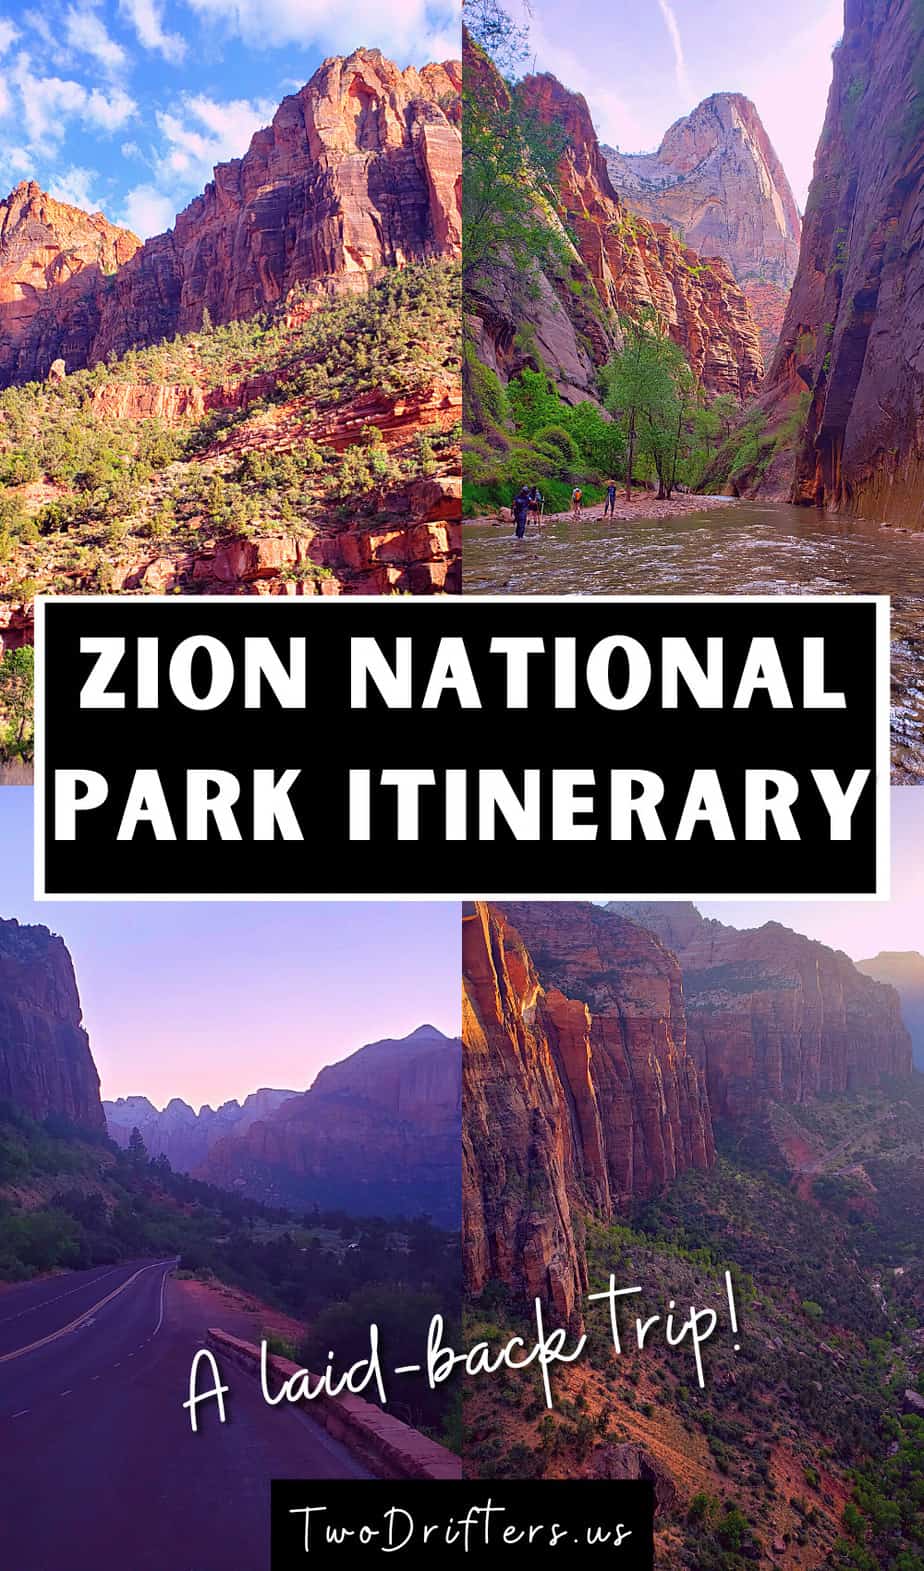 Pinterest social image that says "Zion National Park Itinerary."